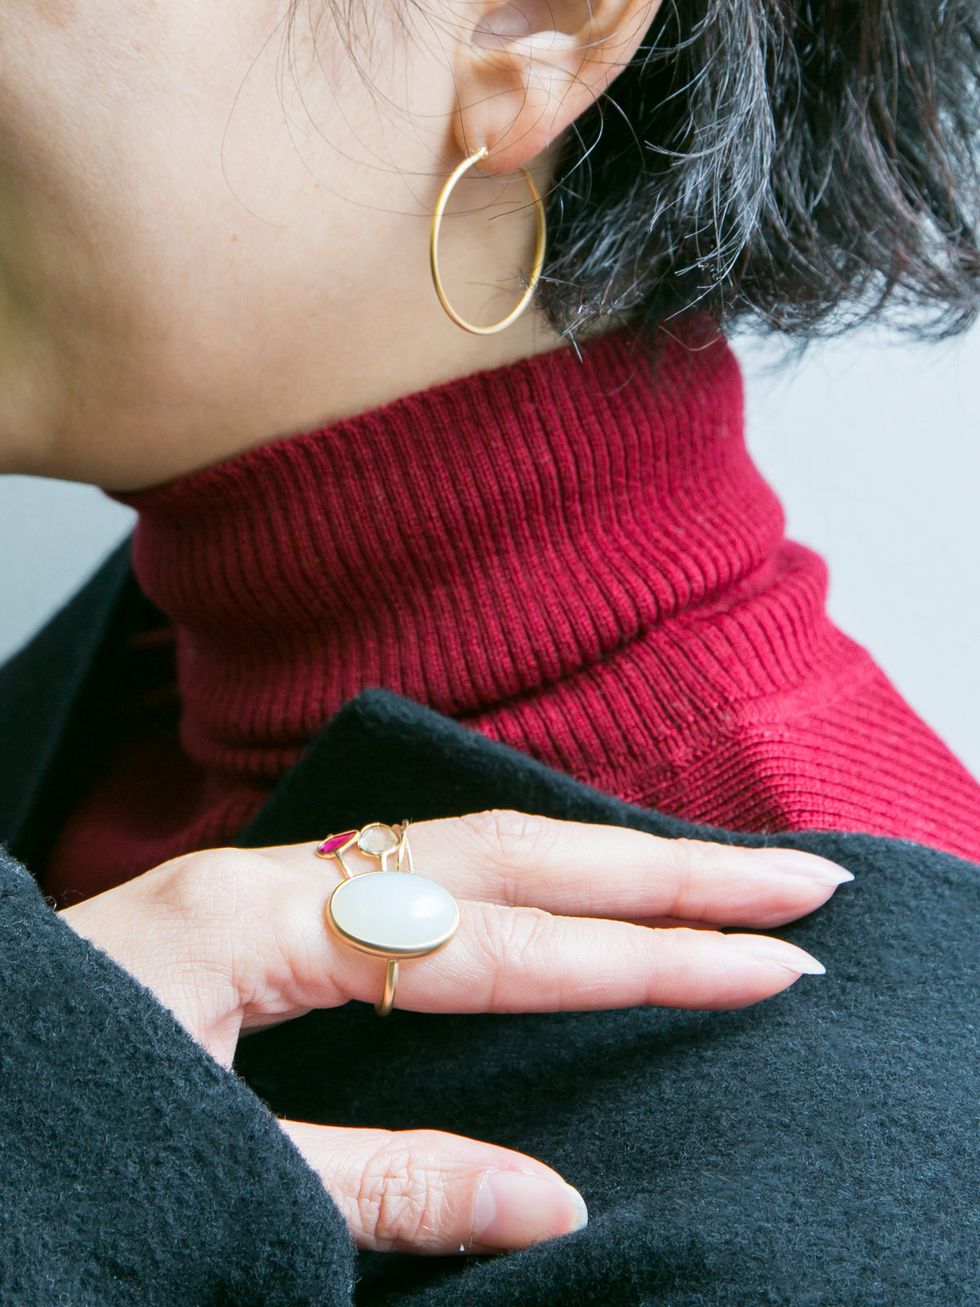 Finger, Neck, Hand, Nail, Fashion accessory, Ring, Jewellery, Lip, Outerwear, Sweater, 